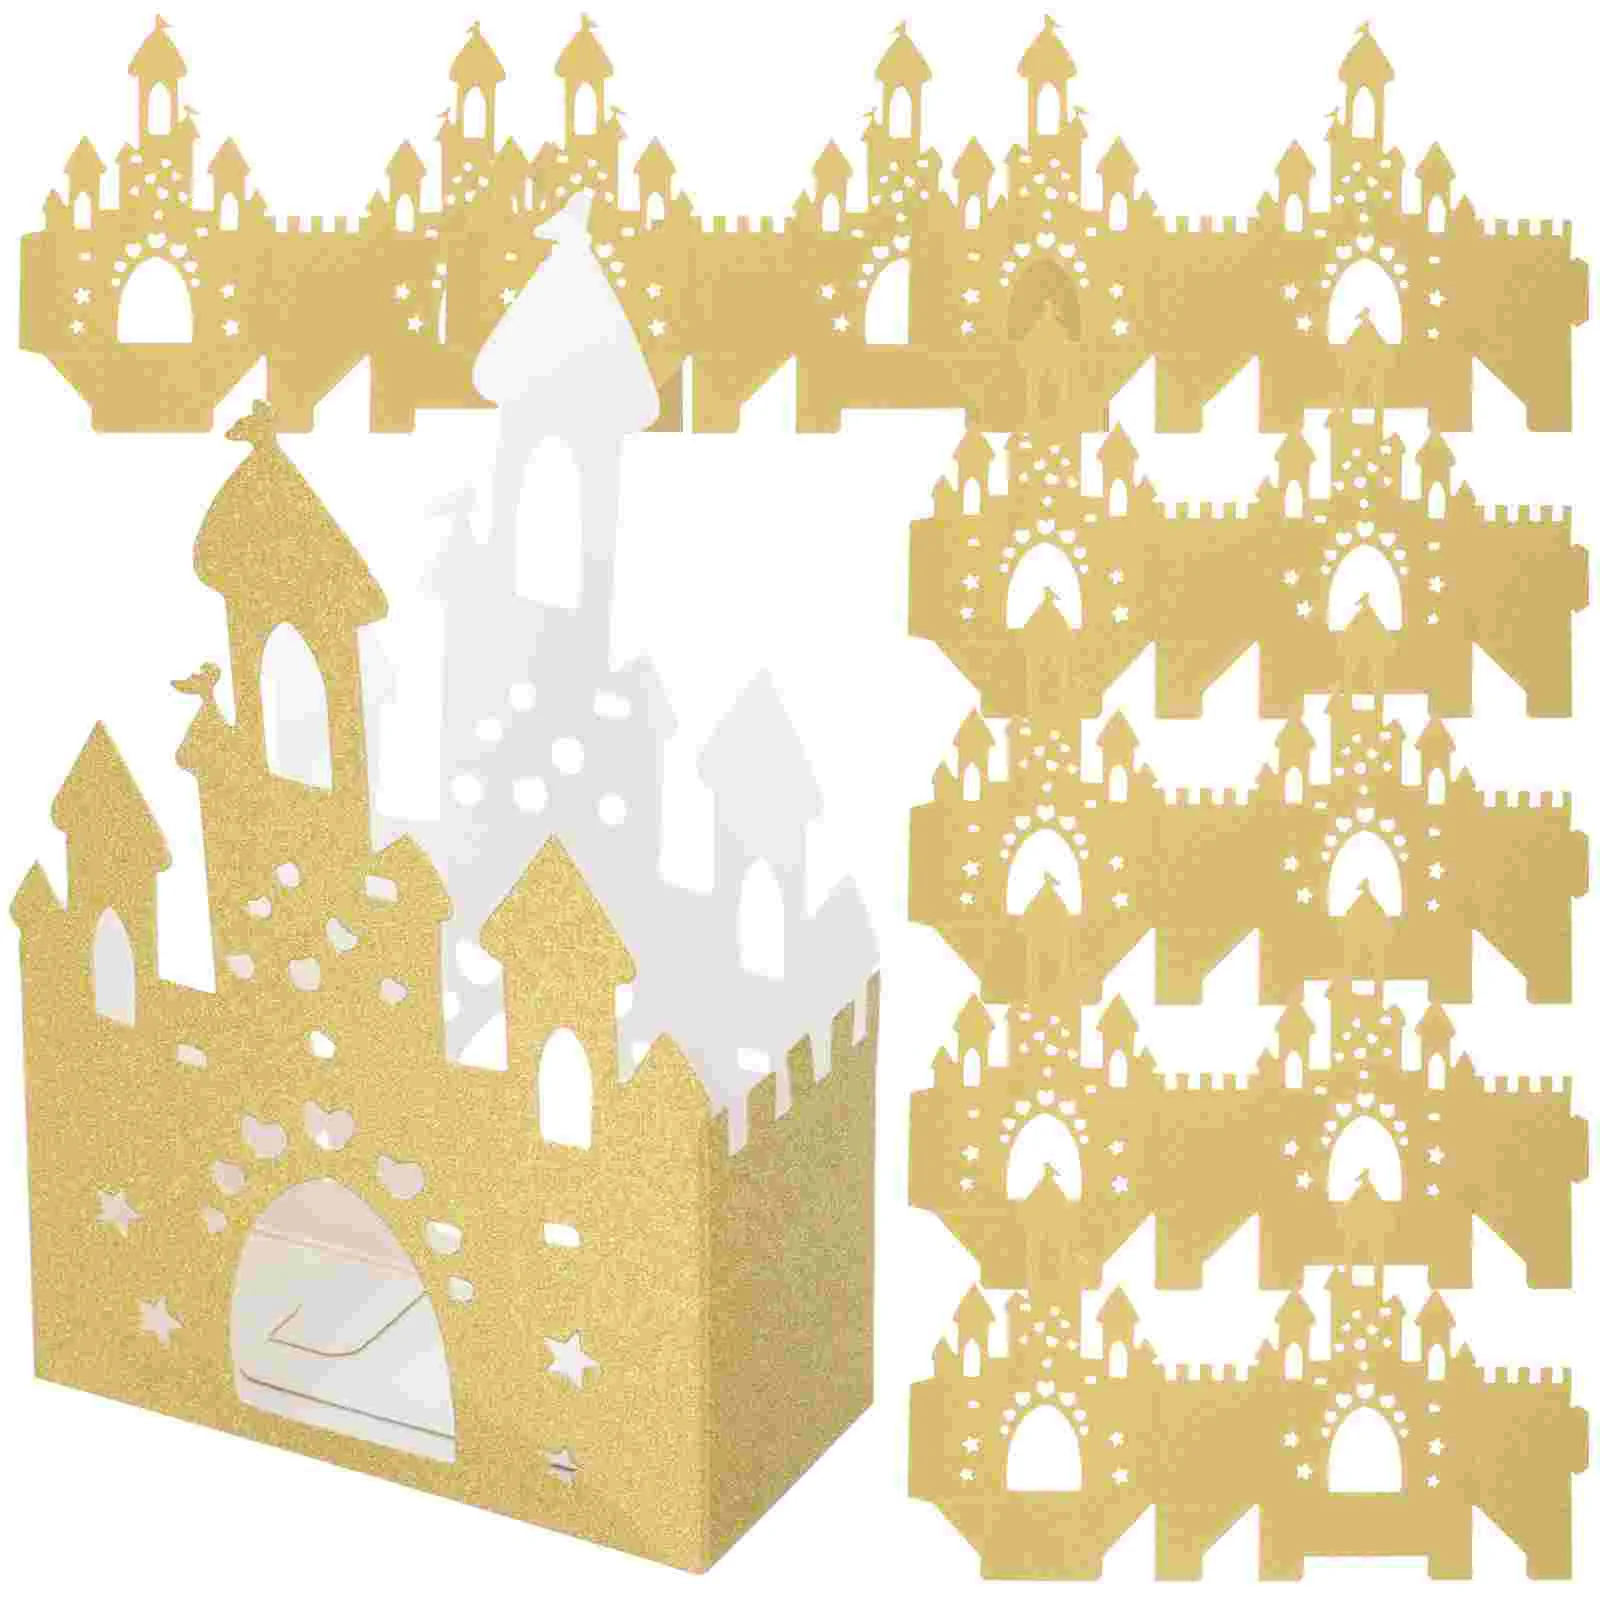 10 Pcs Gingerbread Box Cookie Gift Packing Candy Boxes Decorative Wrapping Containers Gifts Wedding